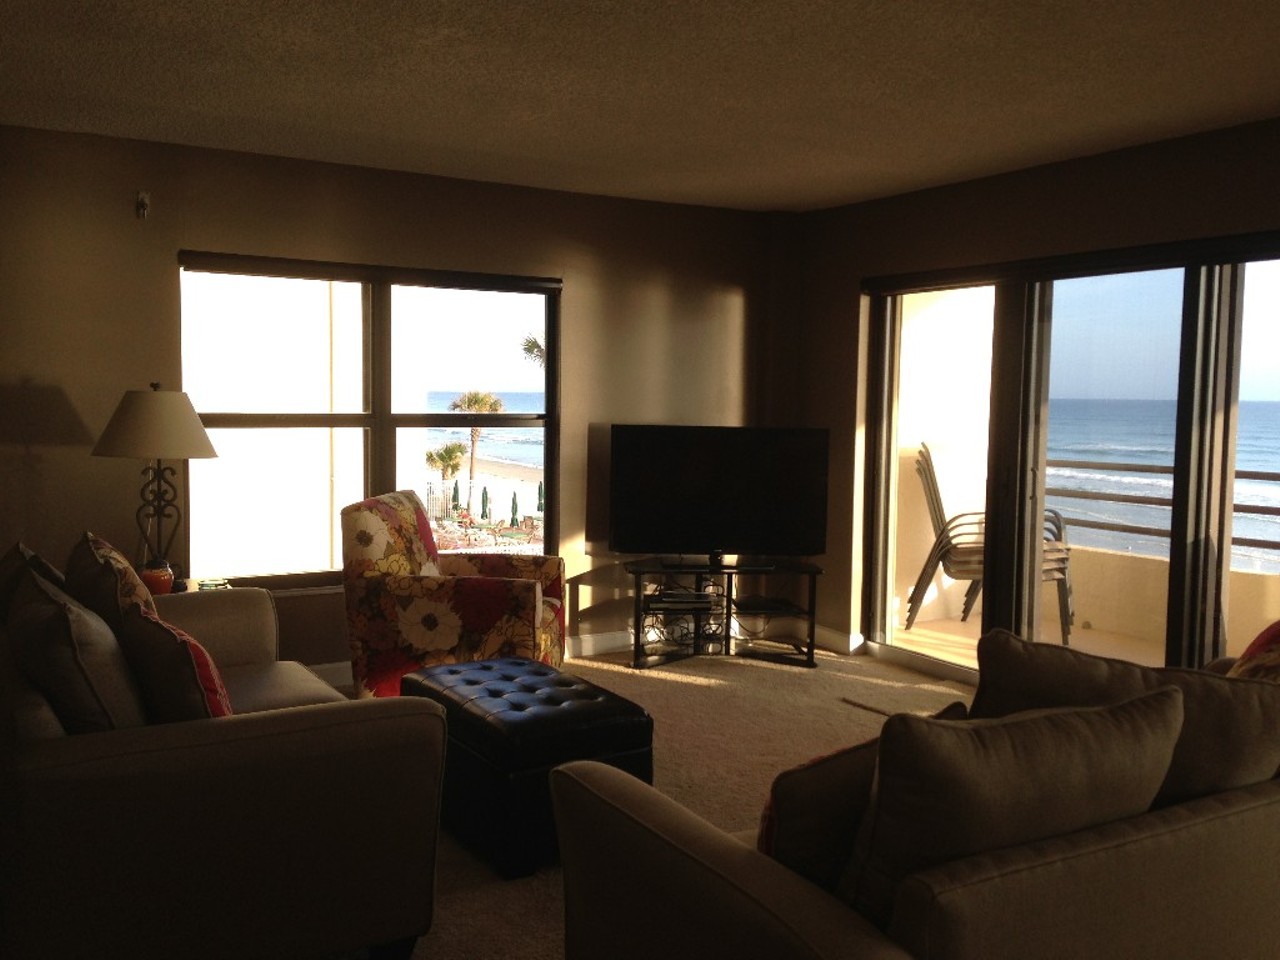  Stay at this three-bedroom beachfront condo in Daytona
Average night $95 
3 bedrooms
A good deal of the condo was refurbished in 2012.